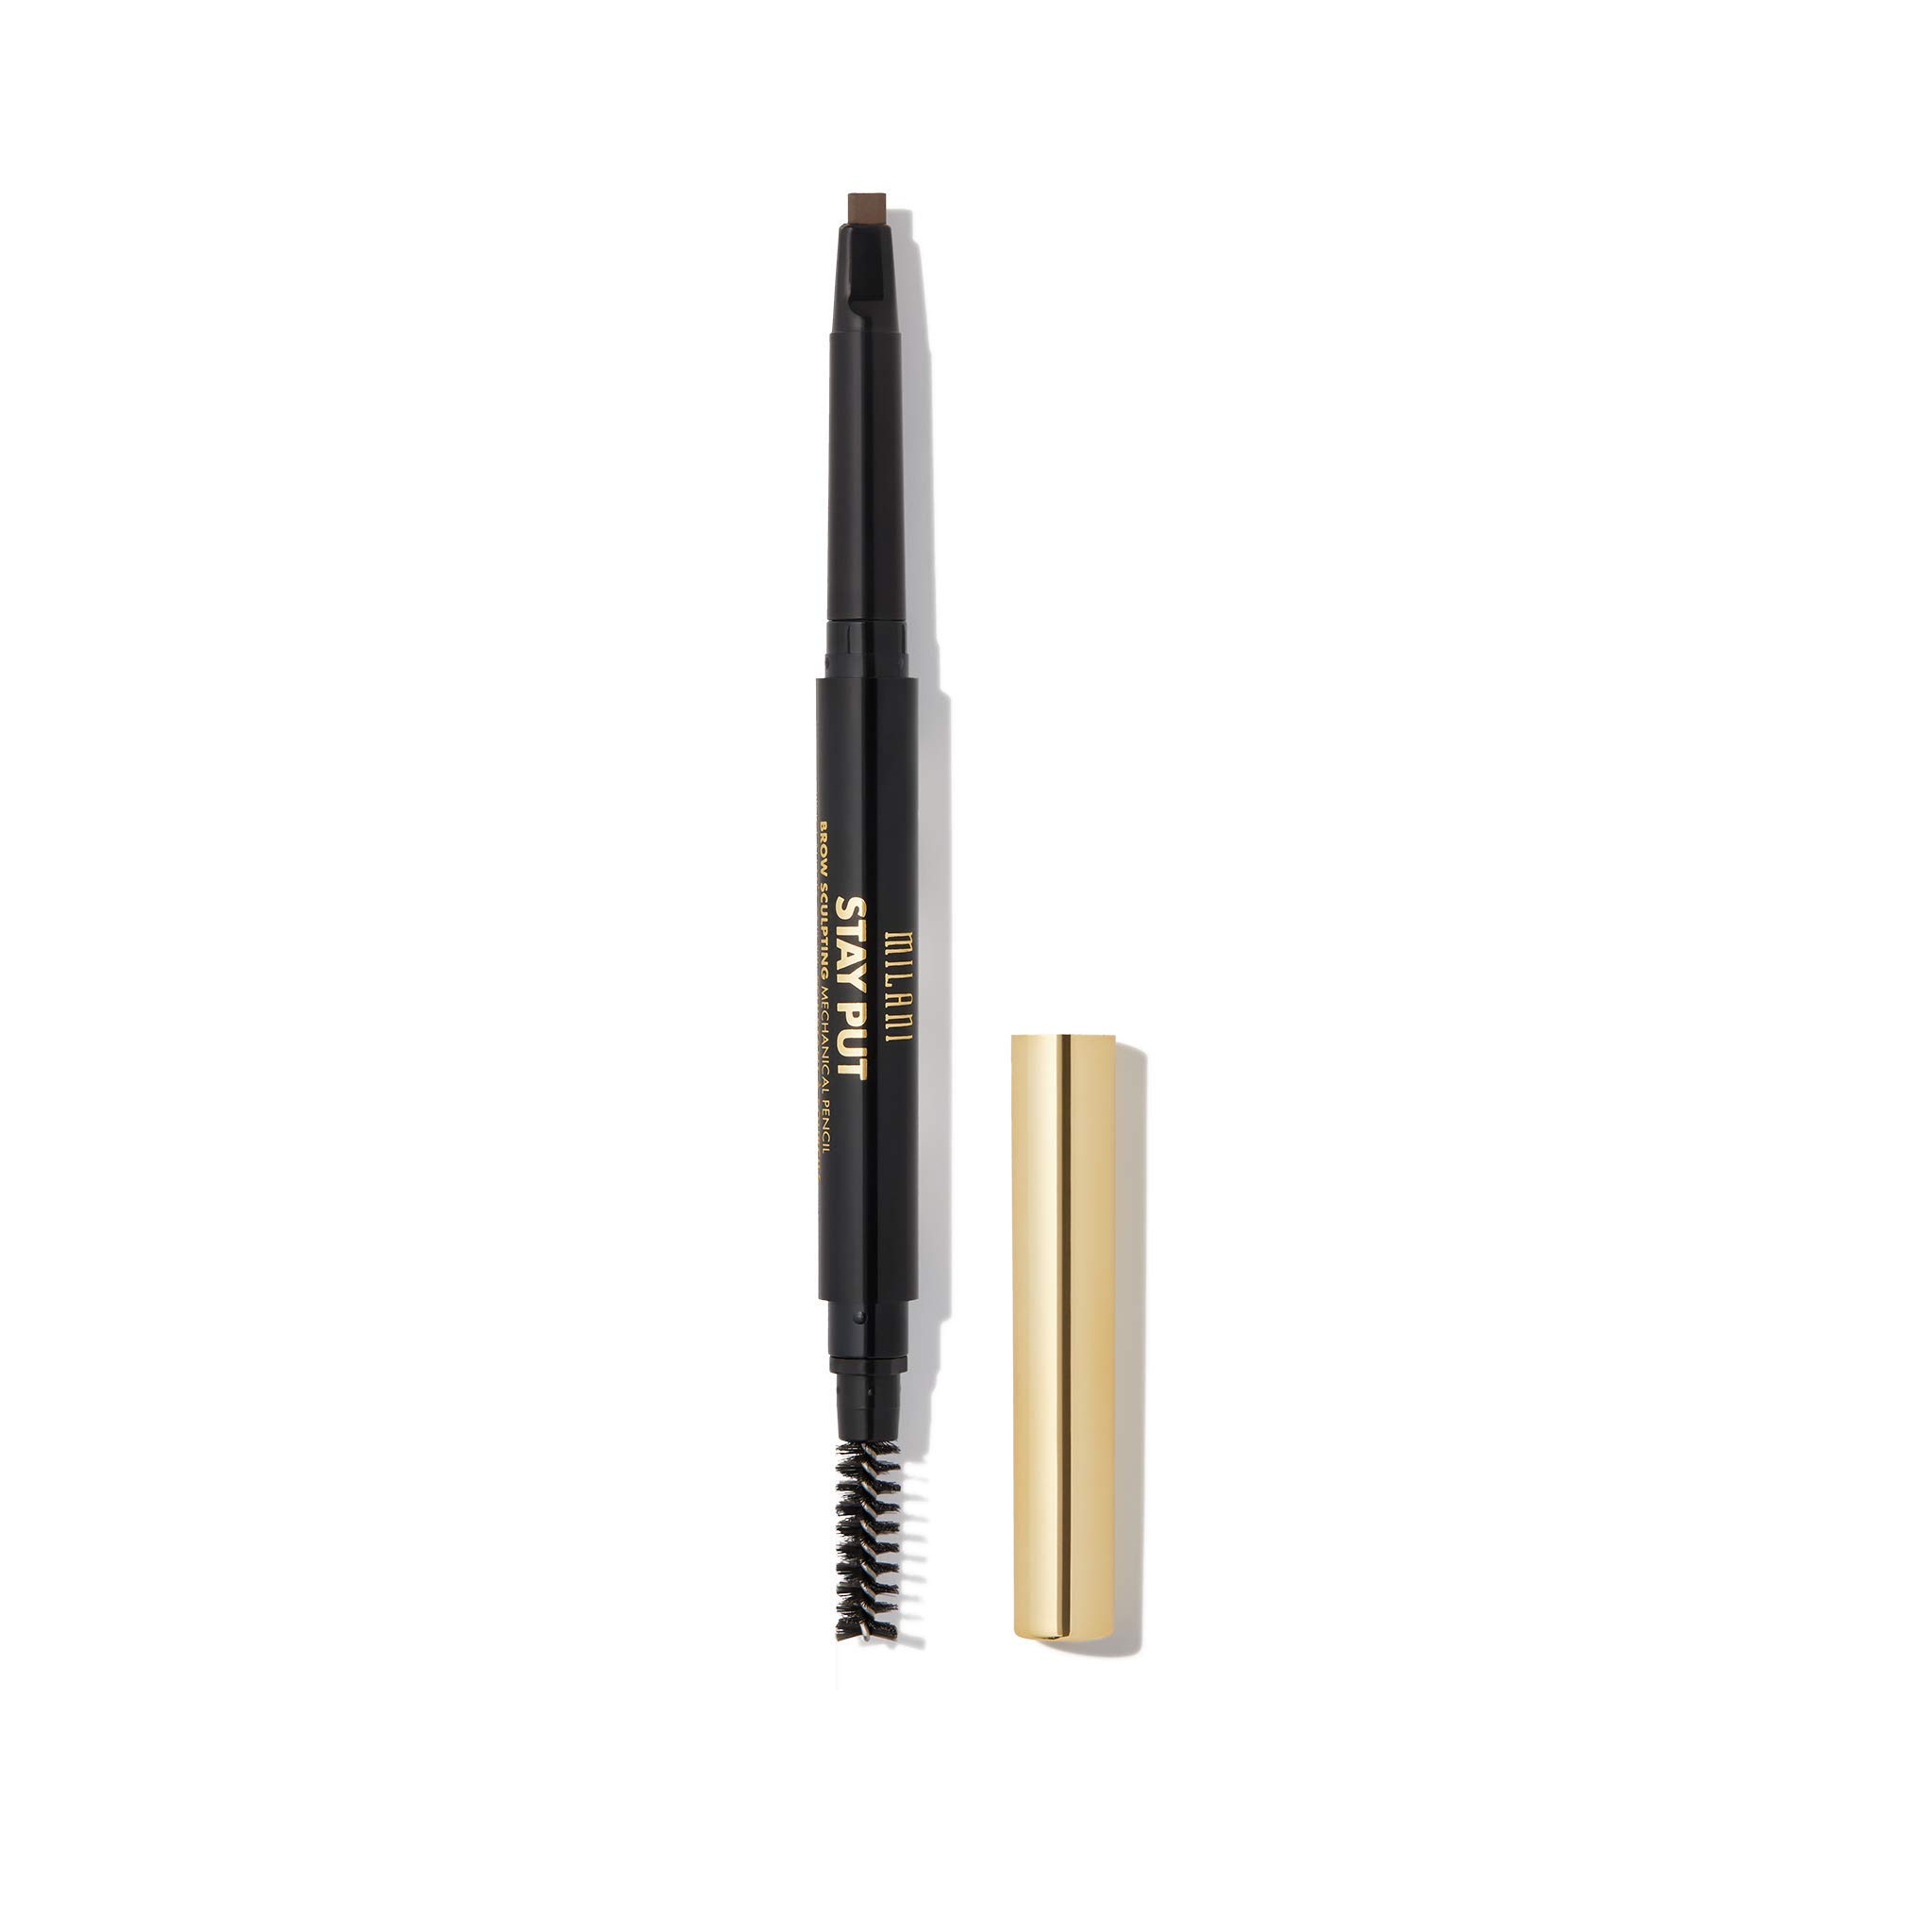 Milani Stay Put Brow Sculpting Mechanical Pencil - Medium Brown (0.01 Ounce) Cruelty-Free Long-Lasting Eyebrow Pencil that Defines and Shapes Brows